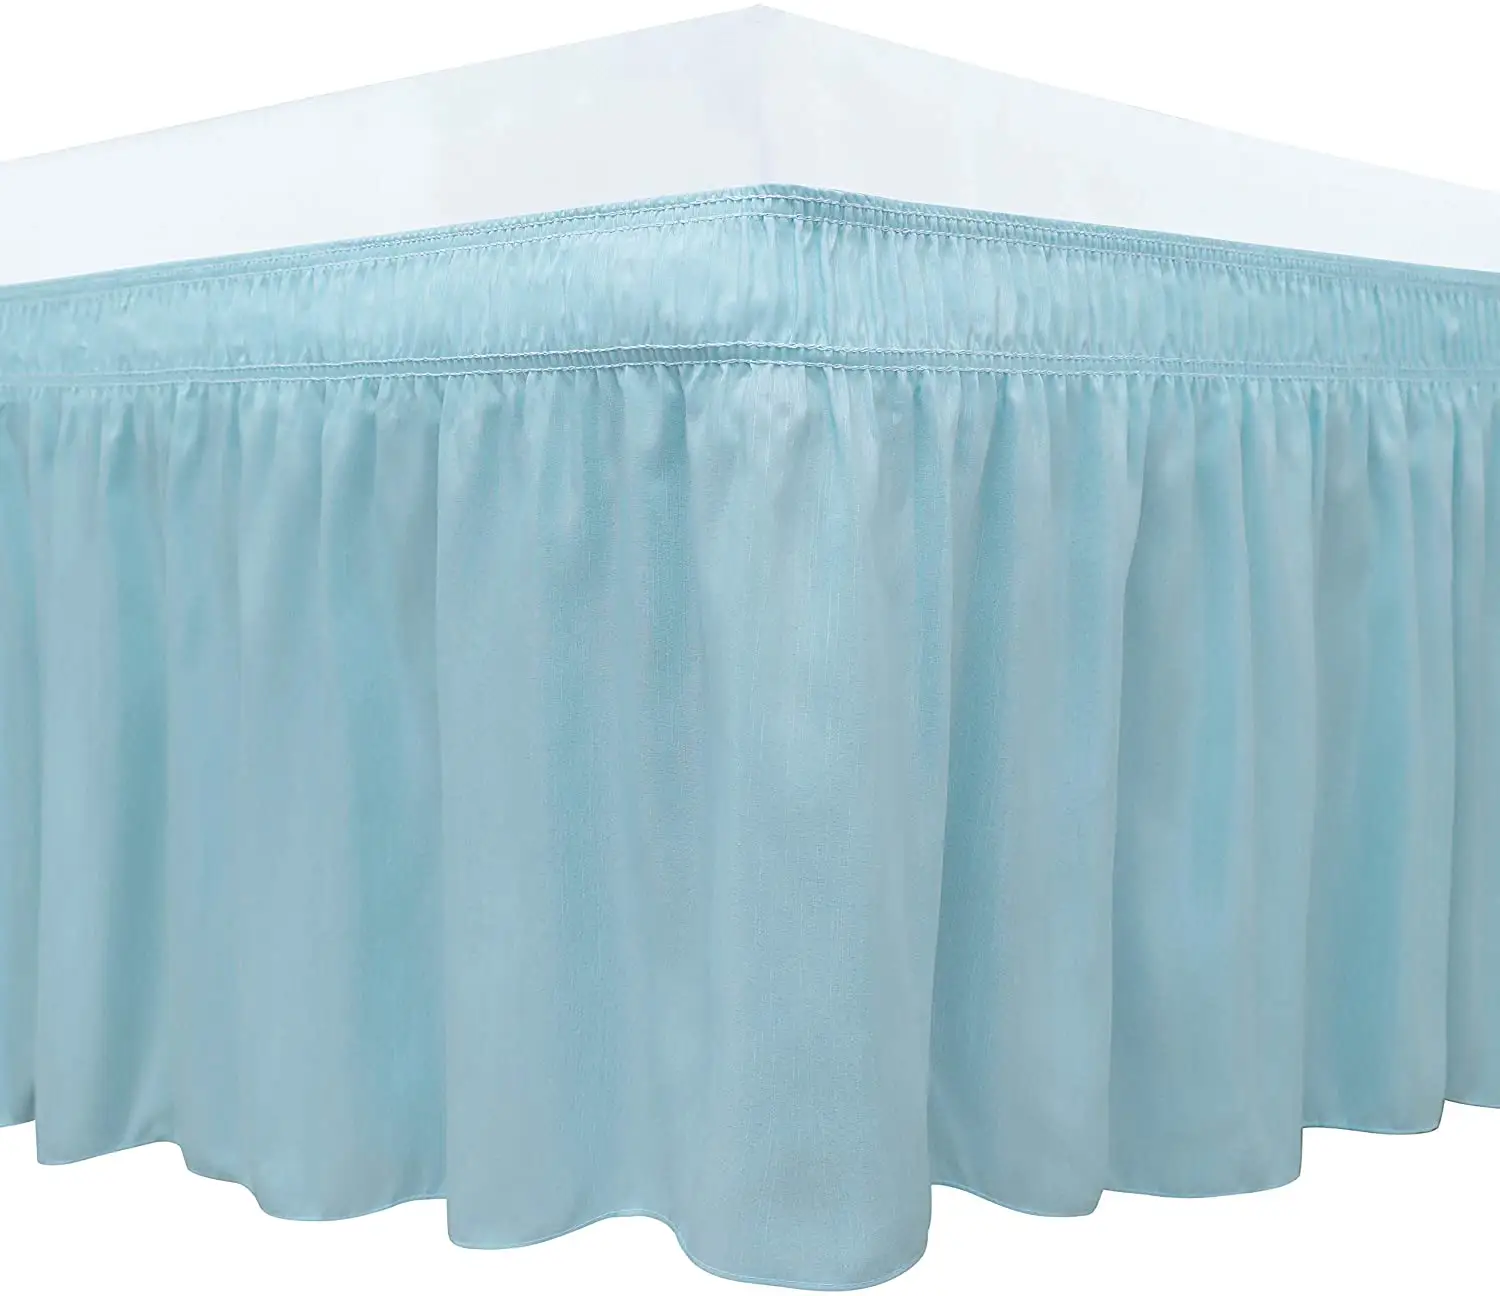 PureFit Wrap Around Ruffled Bed Skirt with Adjustable Elastic Belt Drop Easy to Put On Wrinkle Free Bedskirt Dust Ruffles